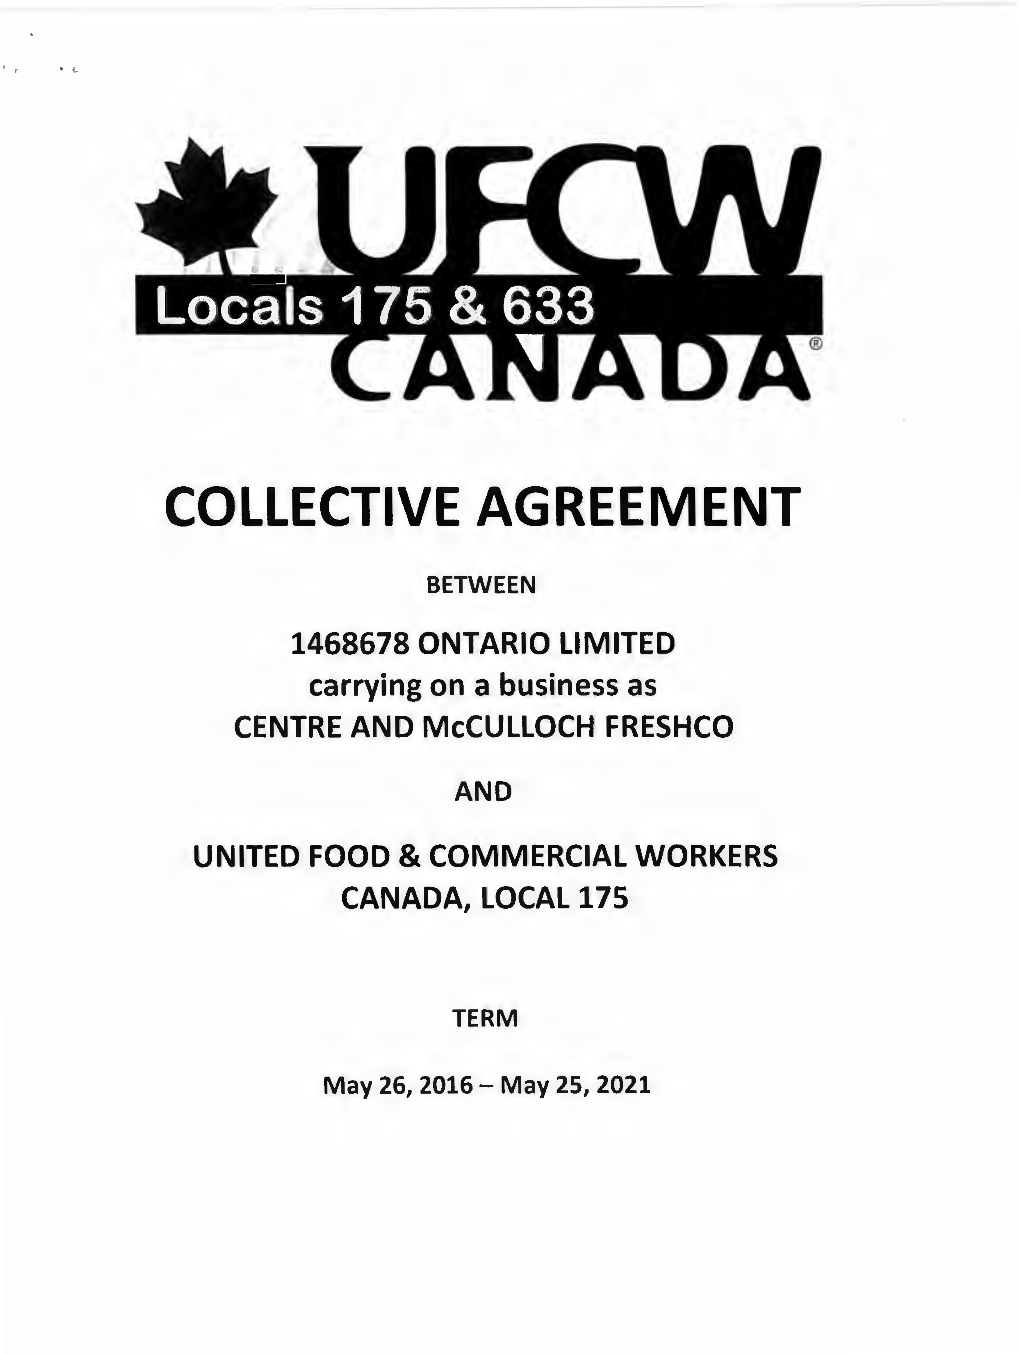 Collective Agreement